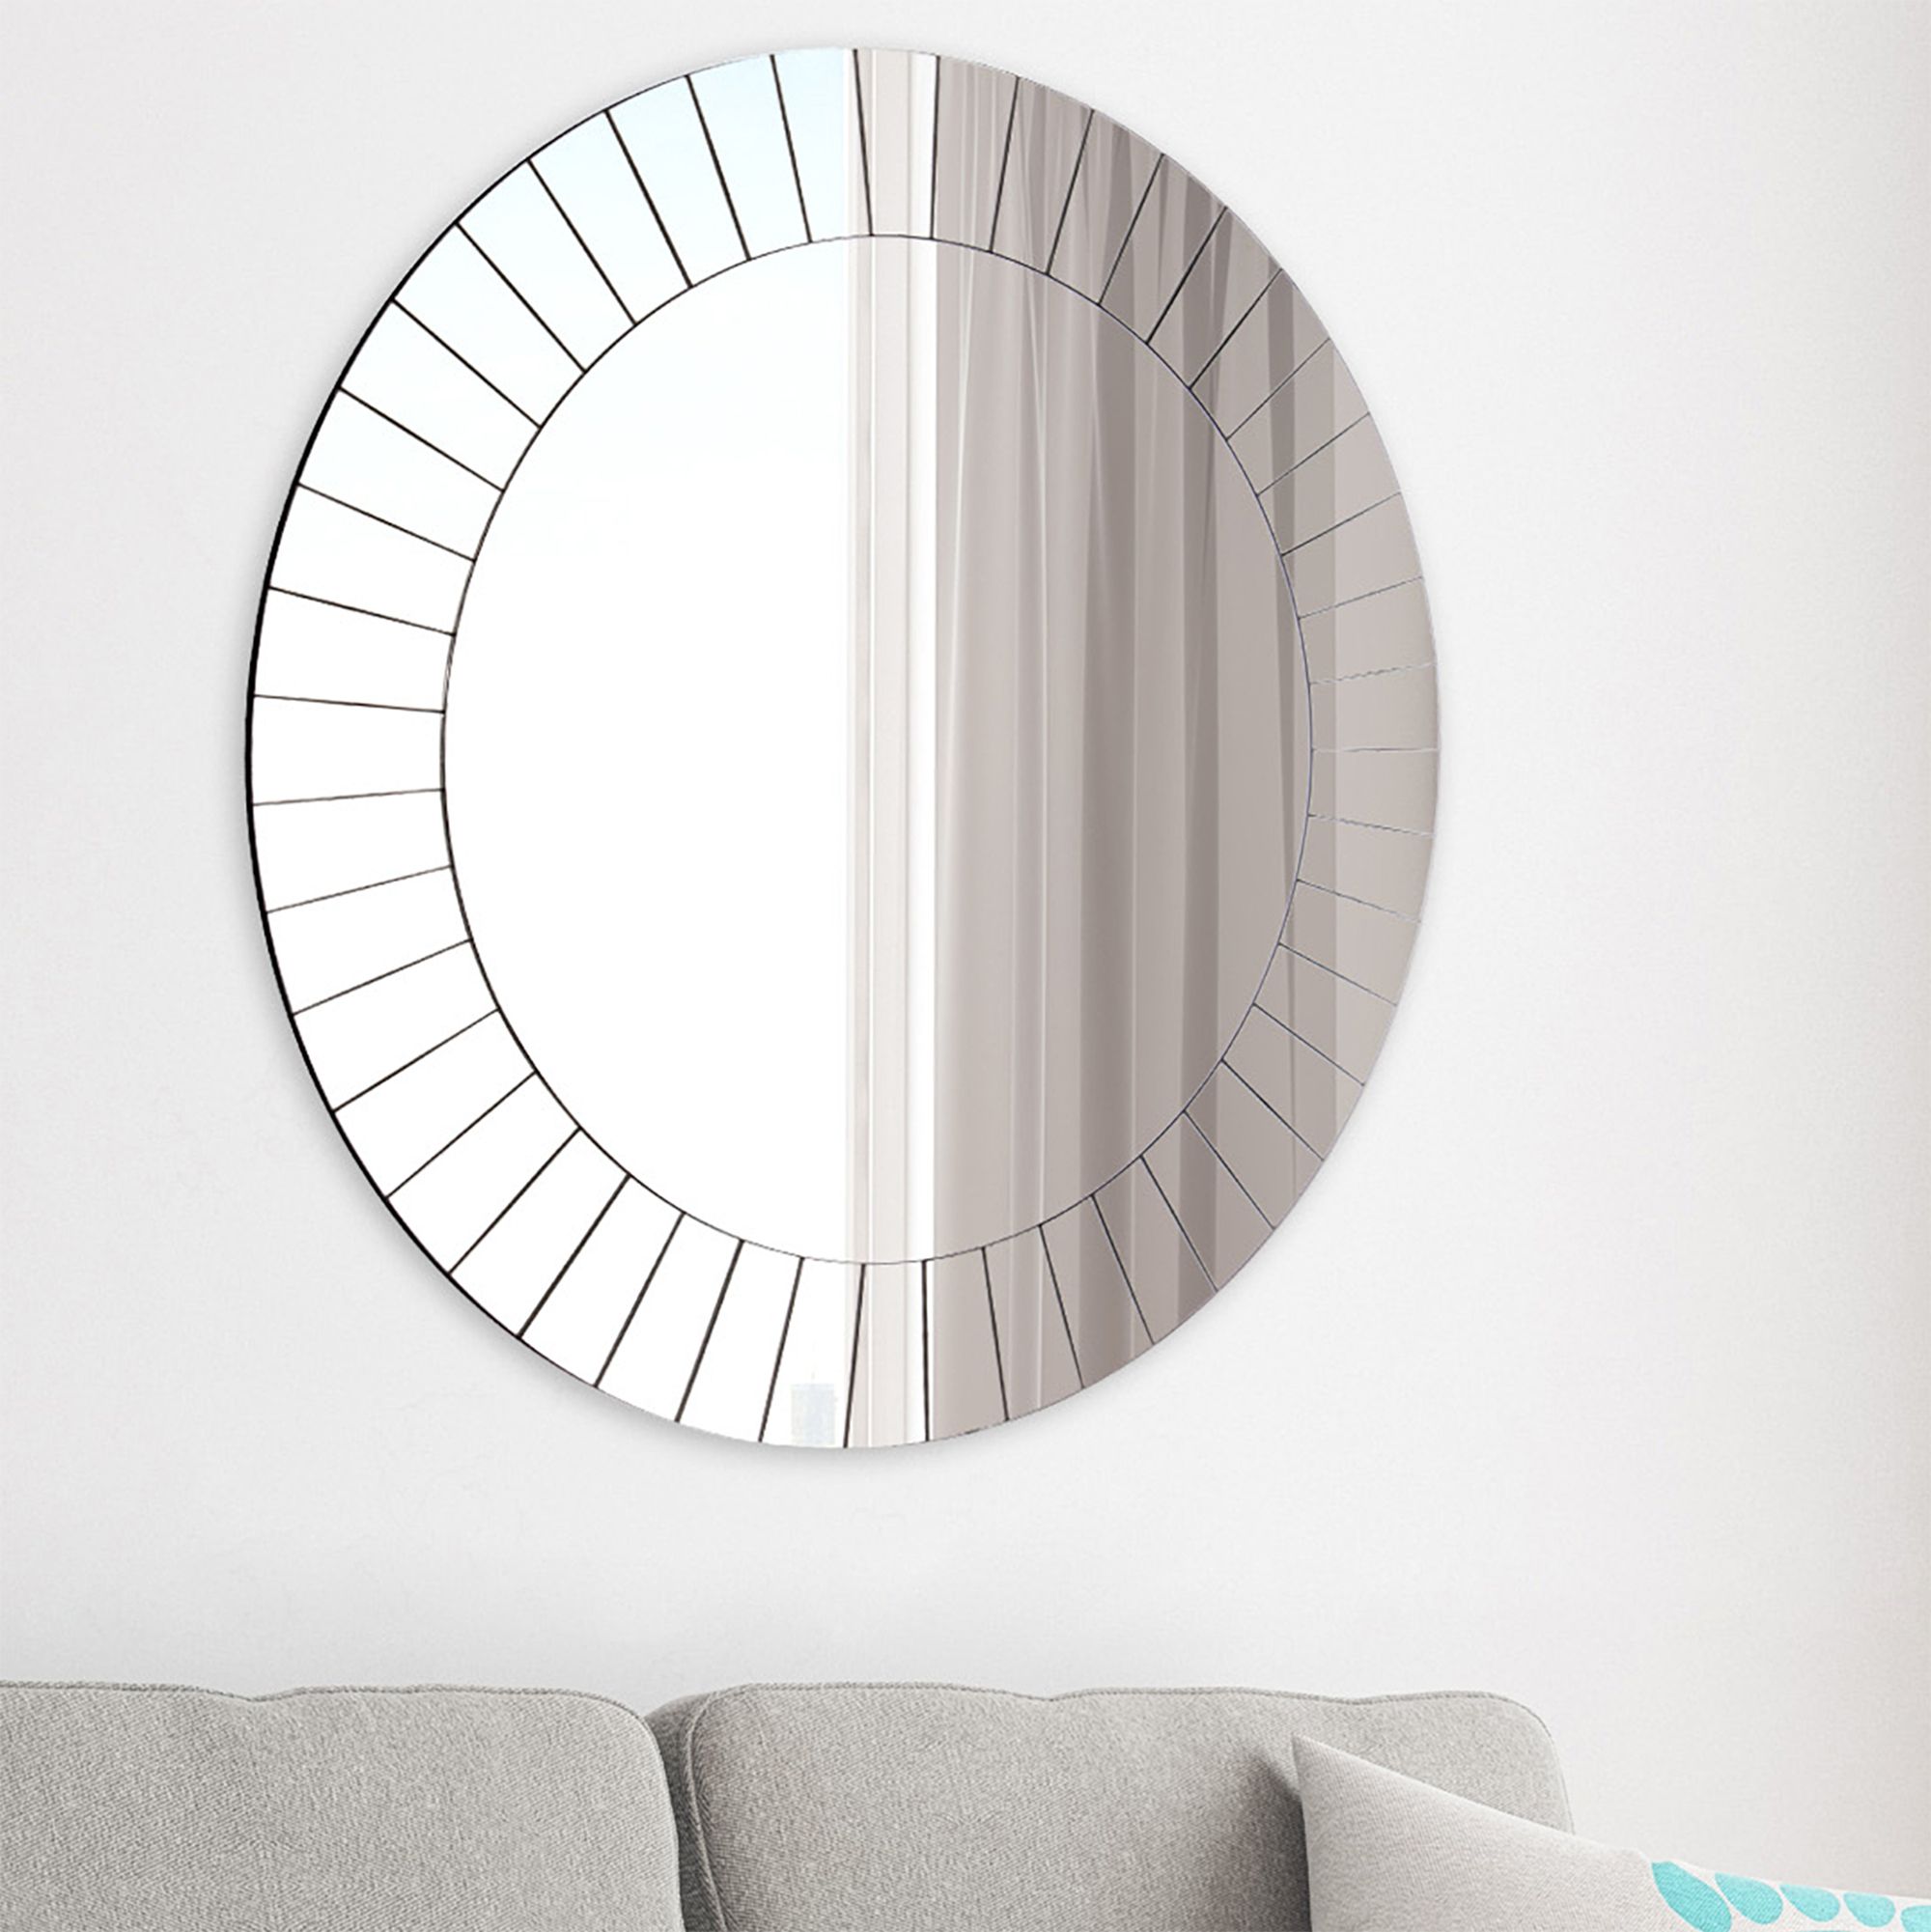 Frameless Beveled Round Wall Mirror 26"x26"gallery Solutions With Round Grid Wall Mirrors (View 10 of 15)